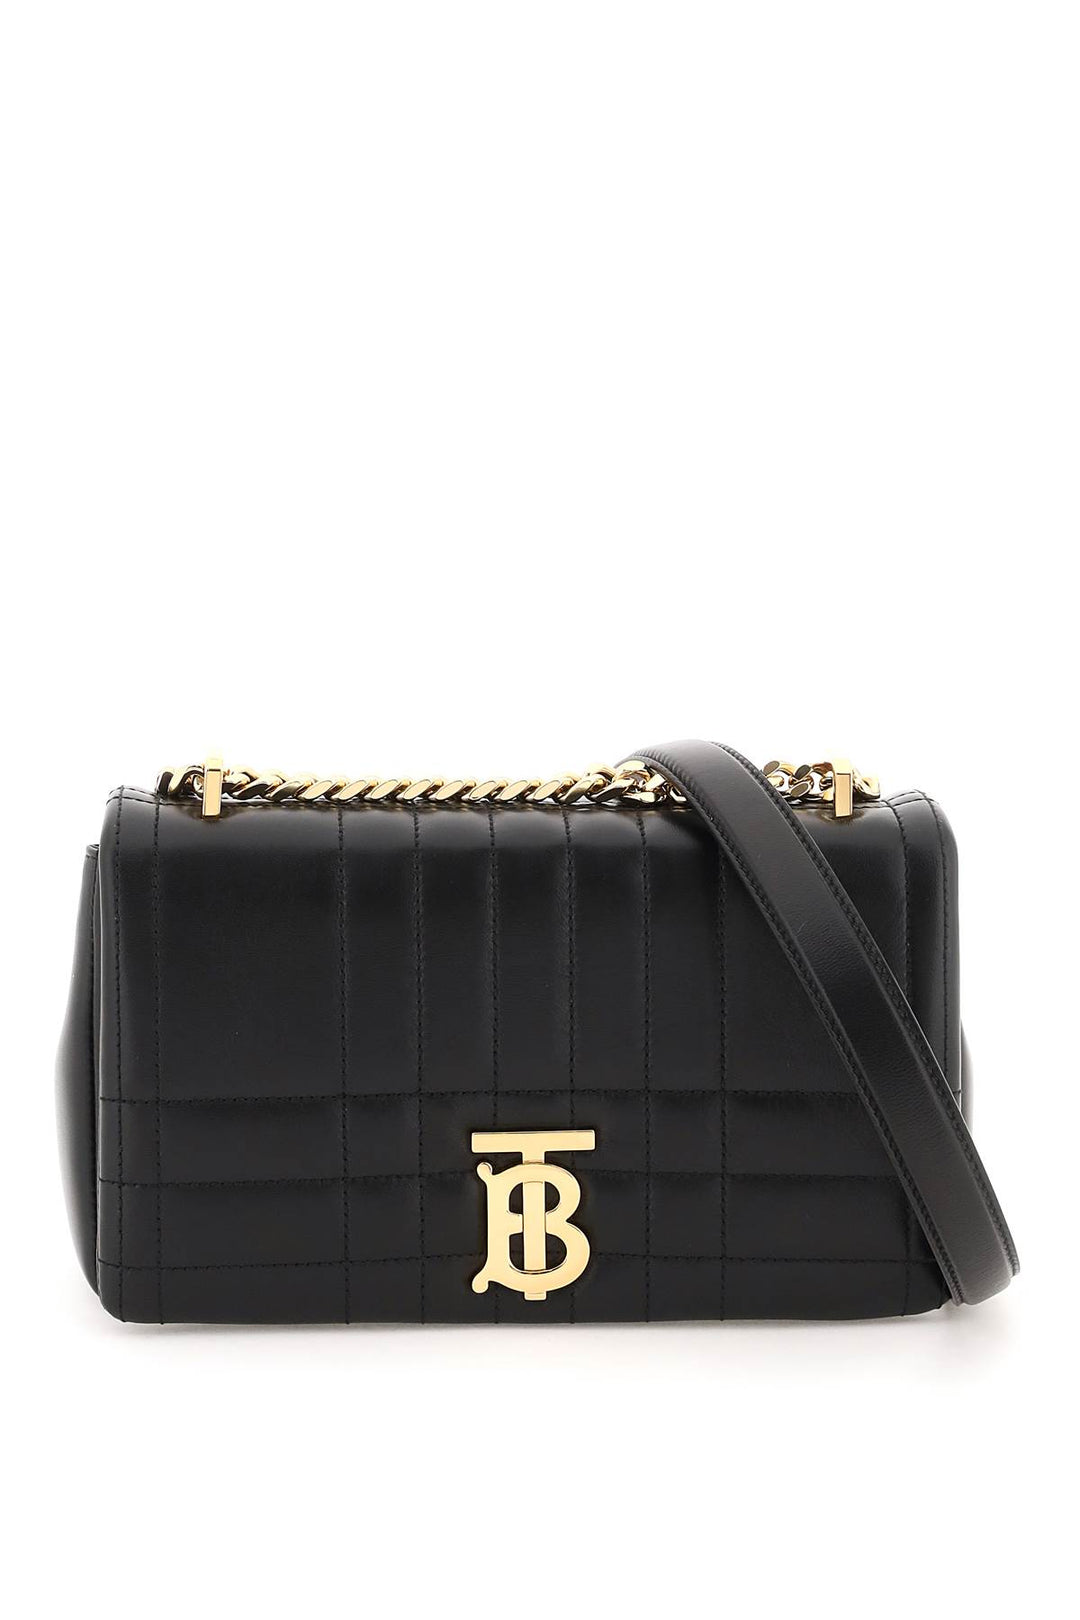 Burberry Quilted Leather Small Lola Bag   Nero